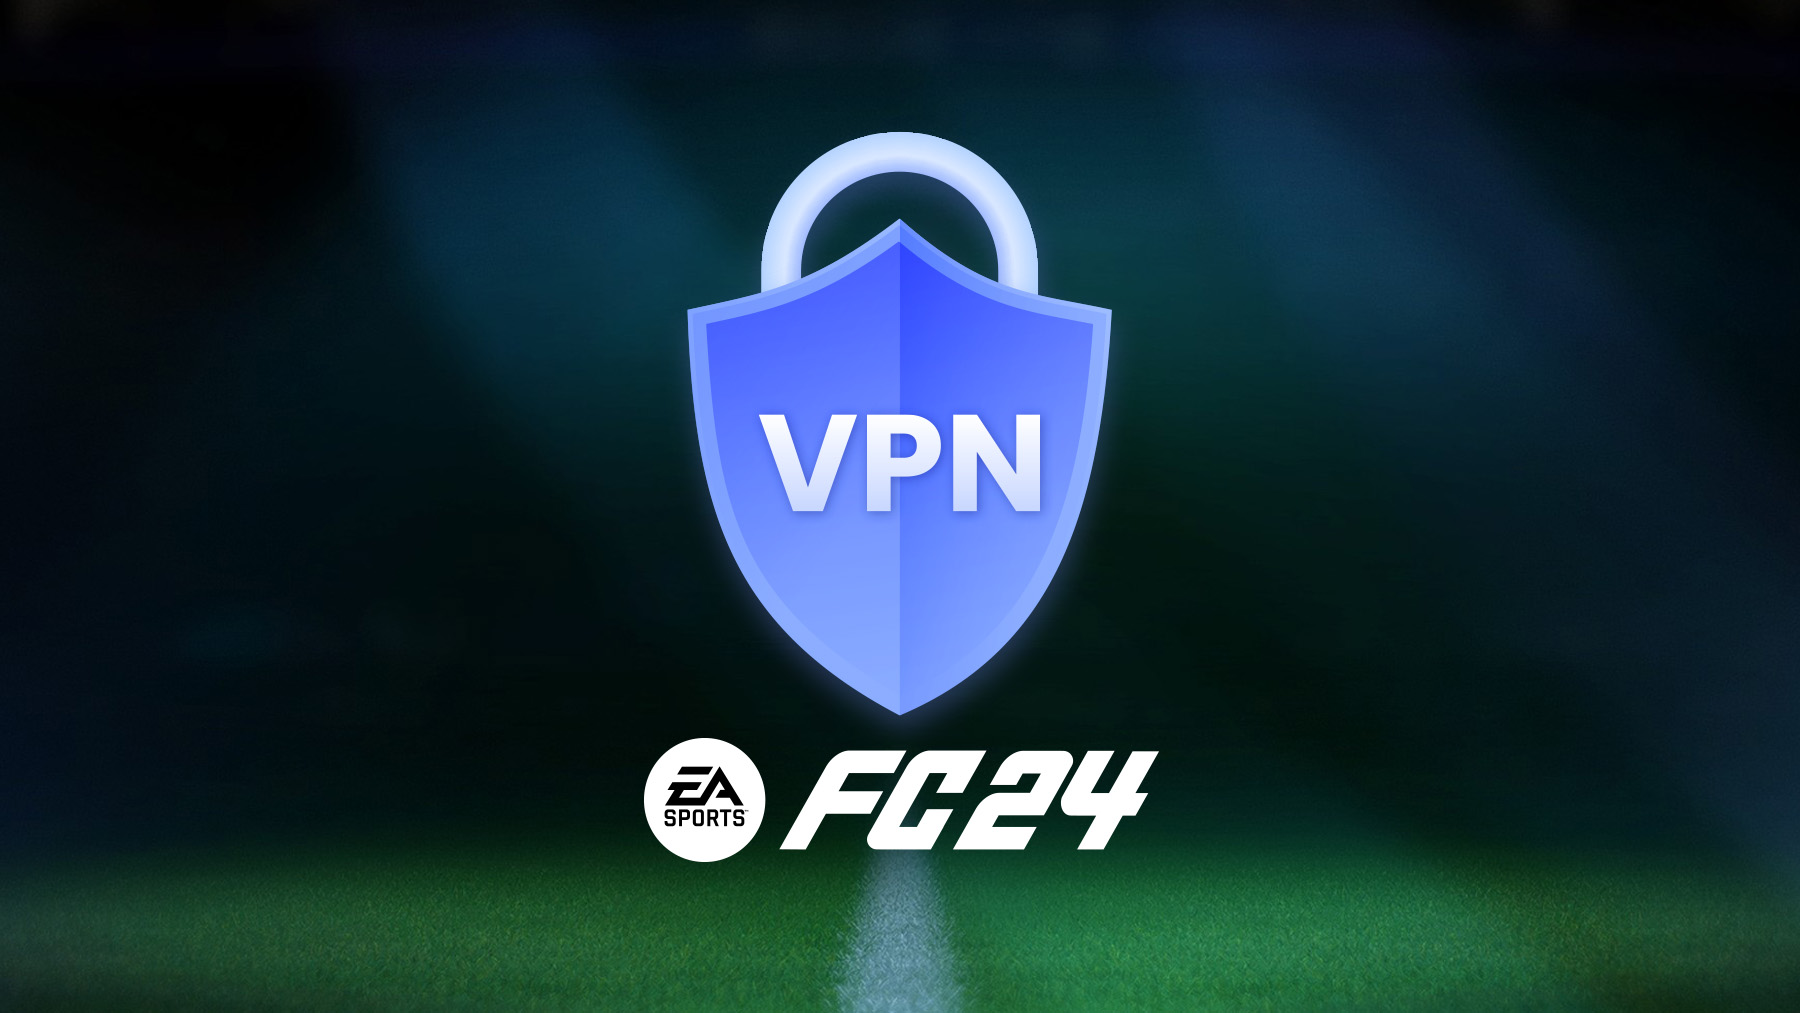 Benefits of Using a VPN for Playing FC 24